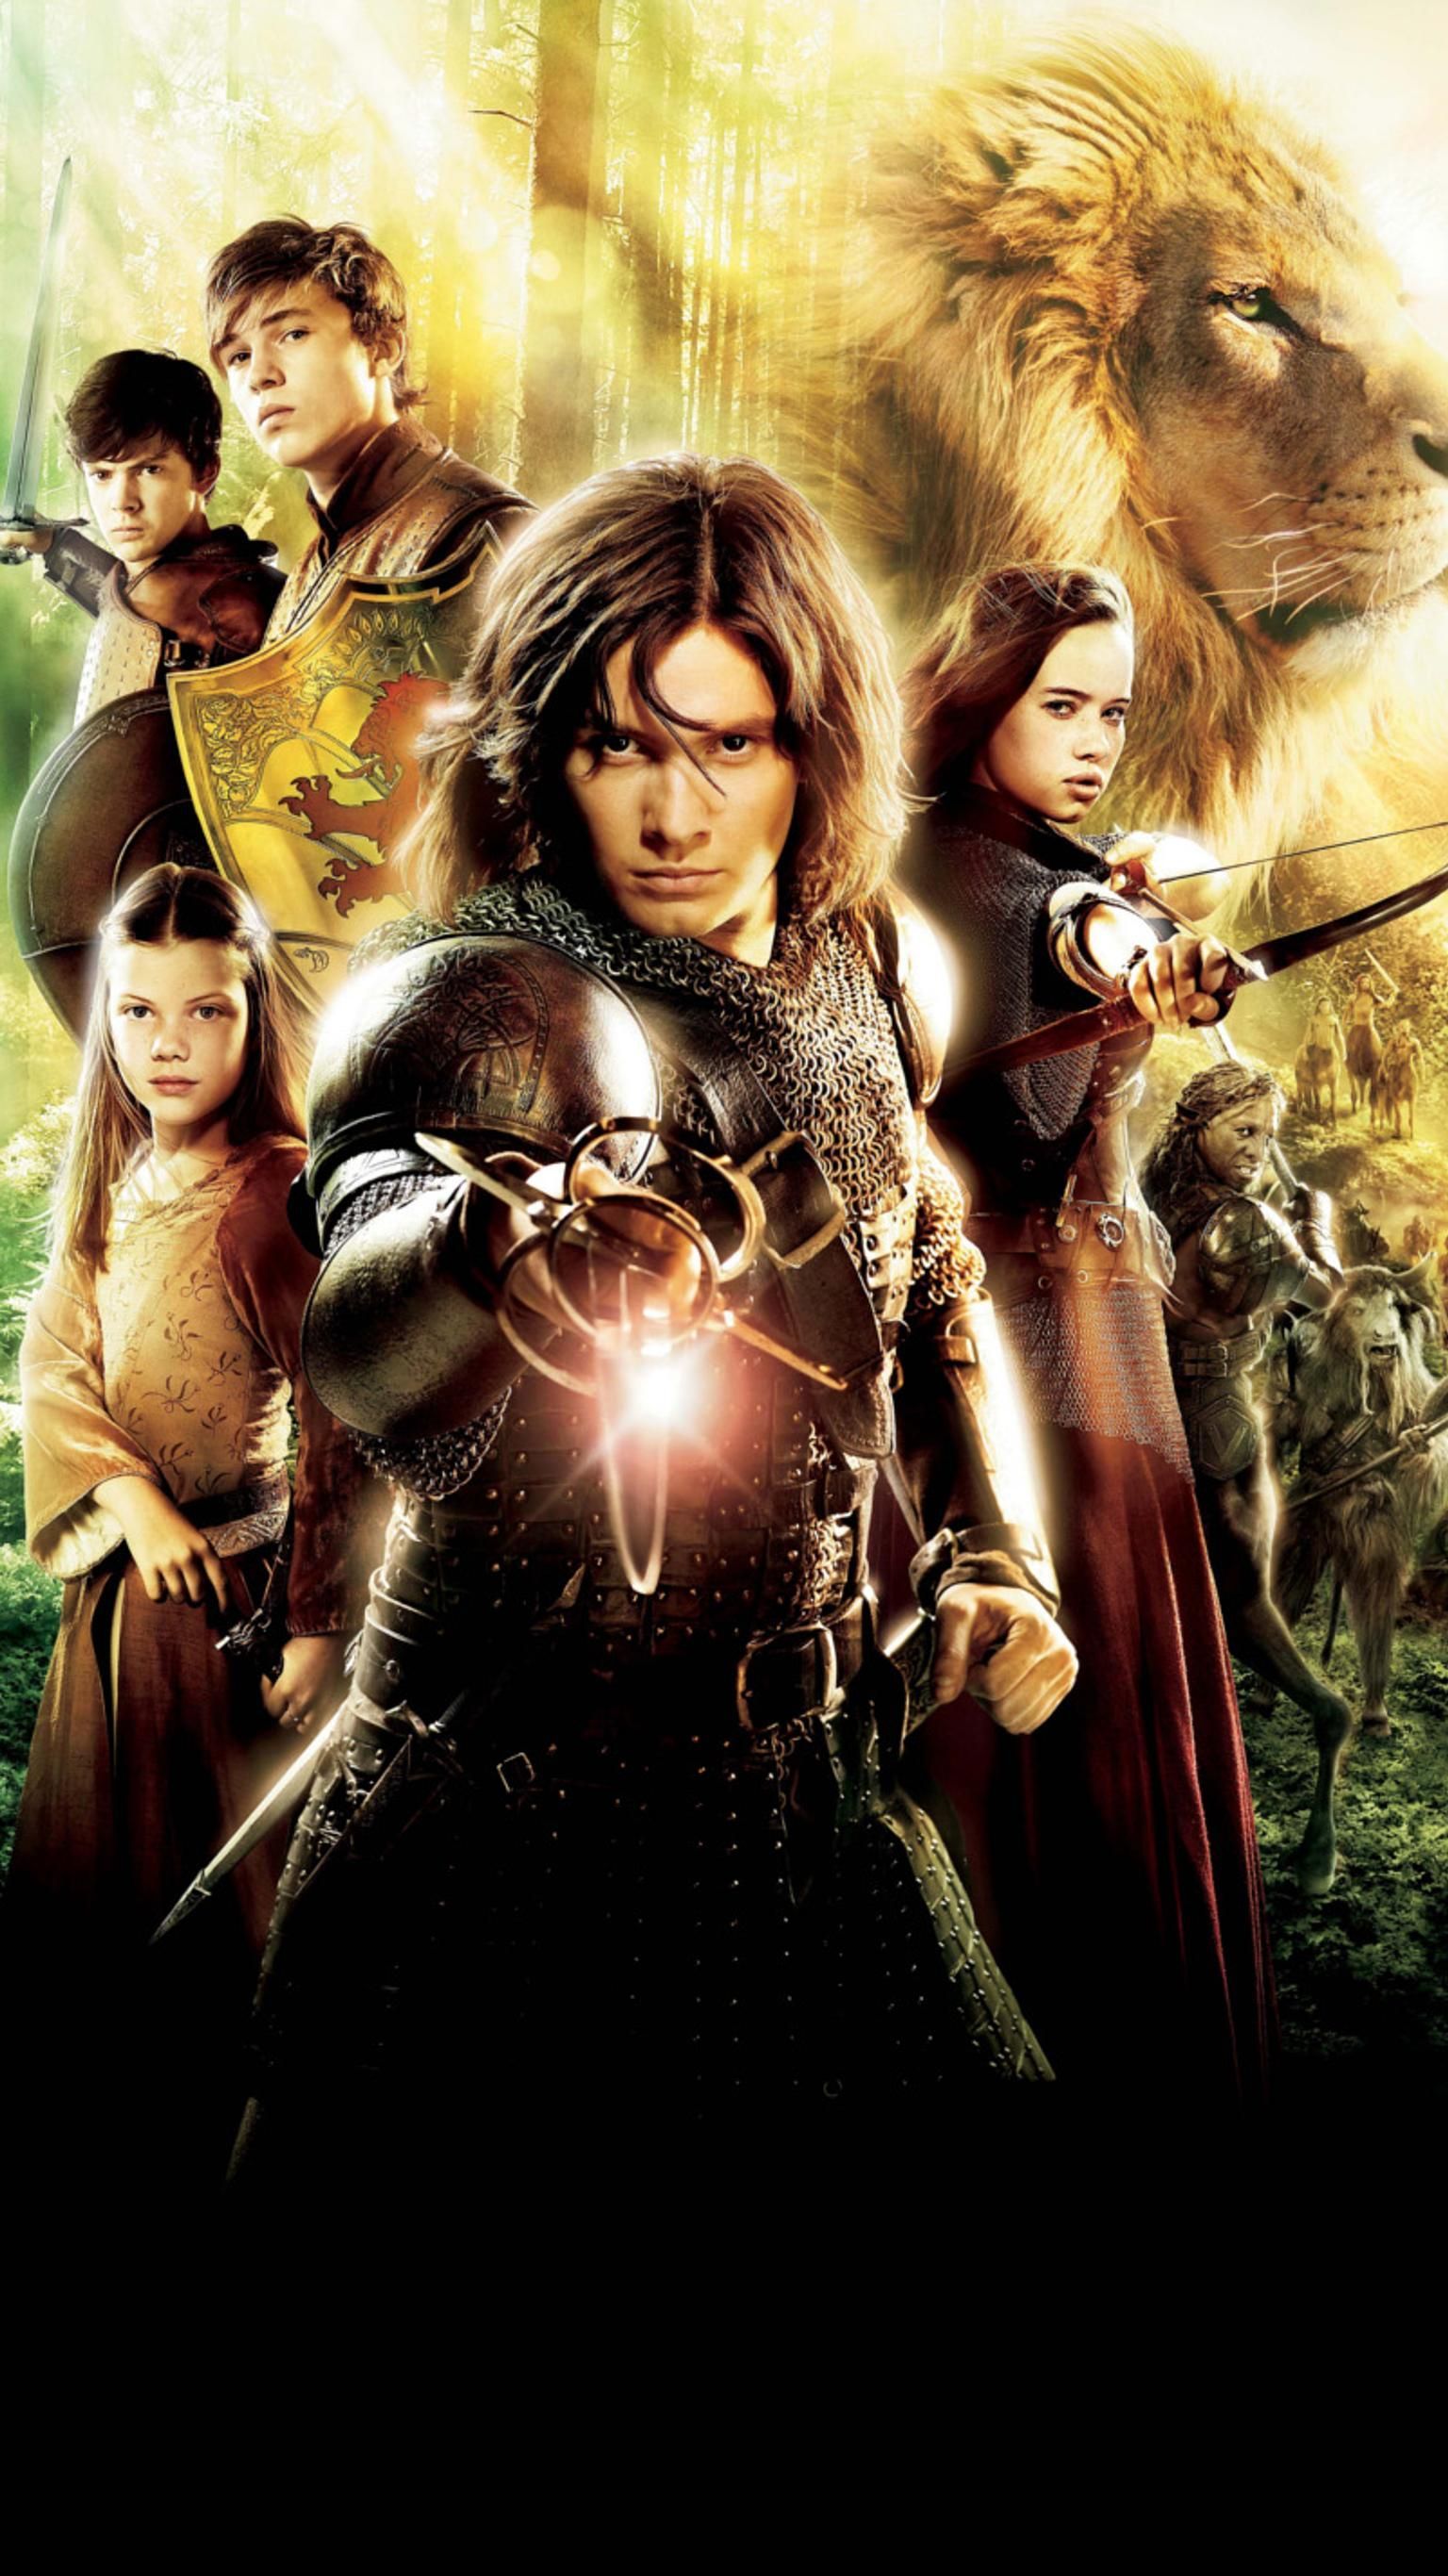 The Chronicles of Narnia: Prince Caspian (2008) Phone Wallpaper. Moviemania. Narnia prince caspian, Chronicles of narnia, Narnia movies